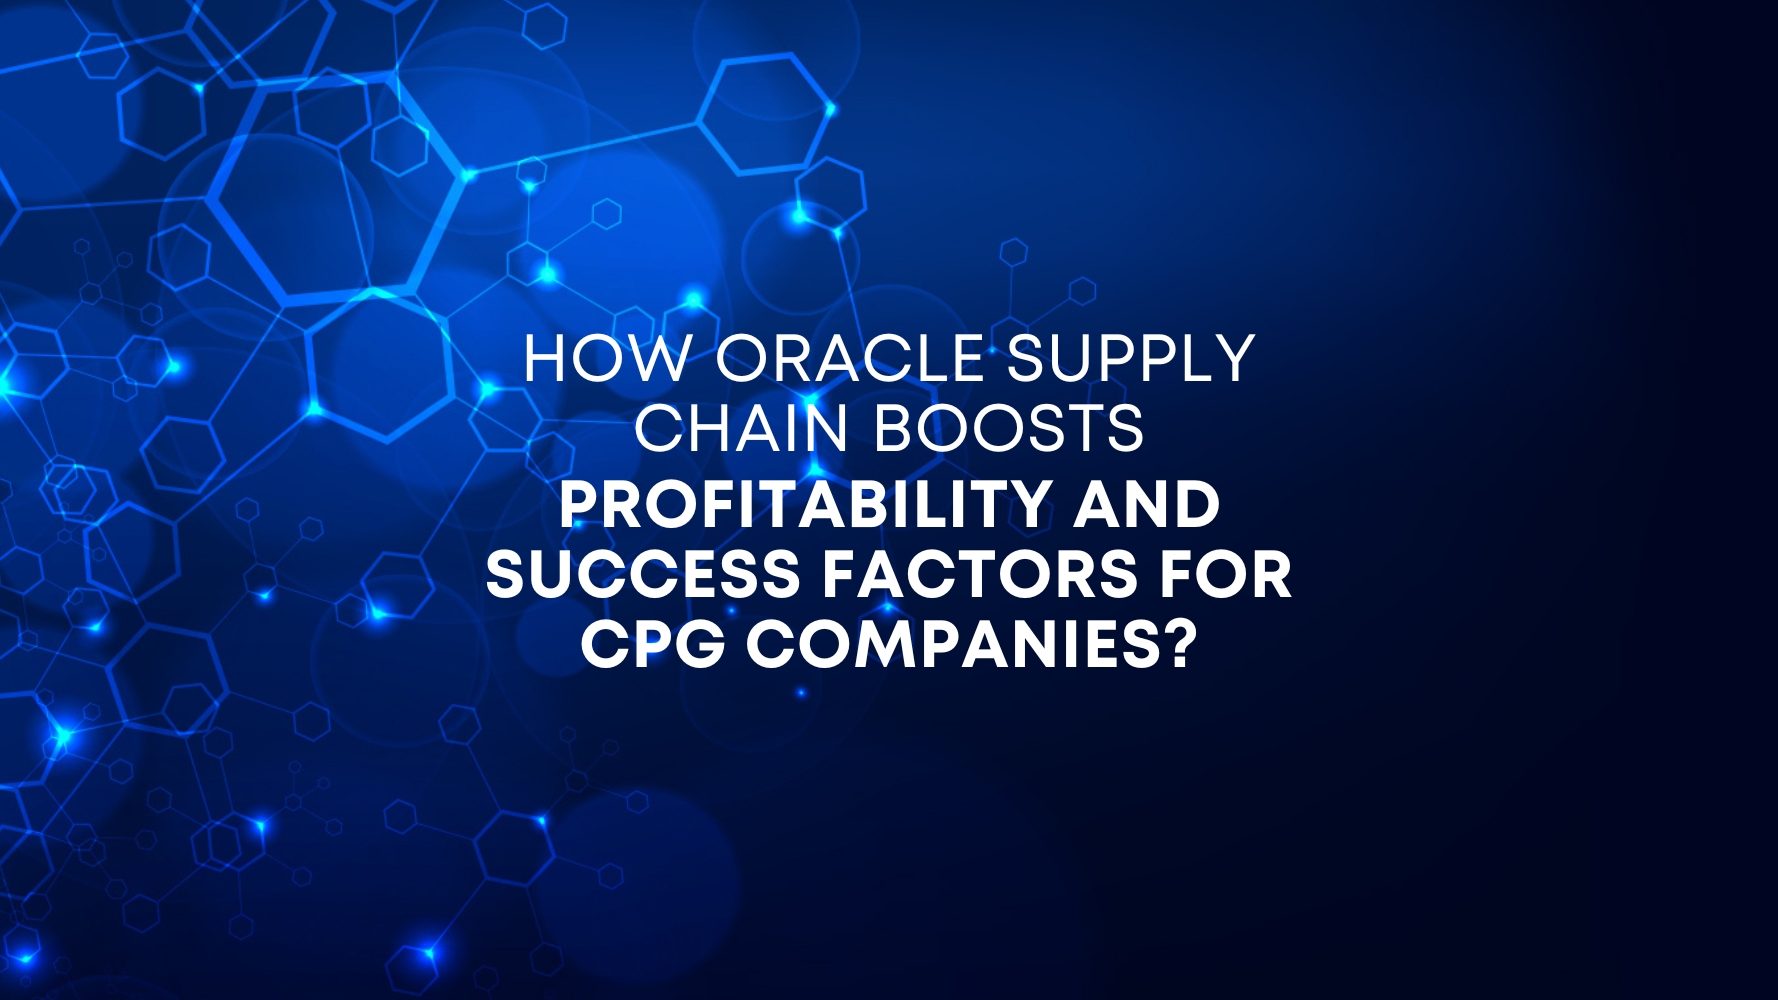 How Oracle Supply Chain Boosts Profitability and Success Factors for CPG